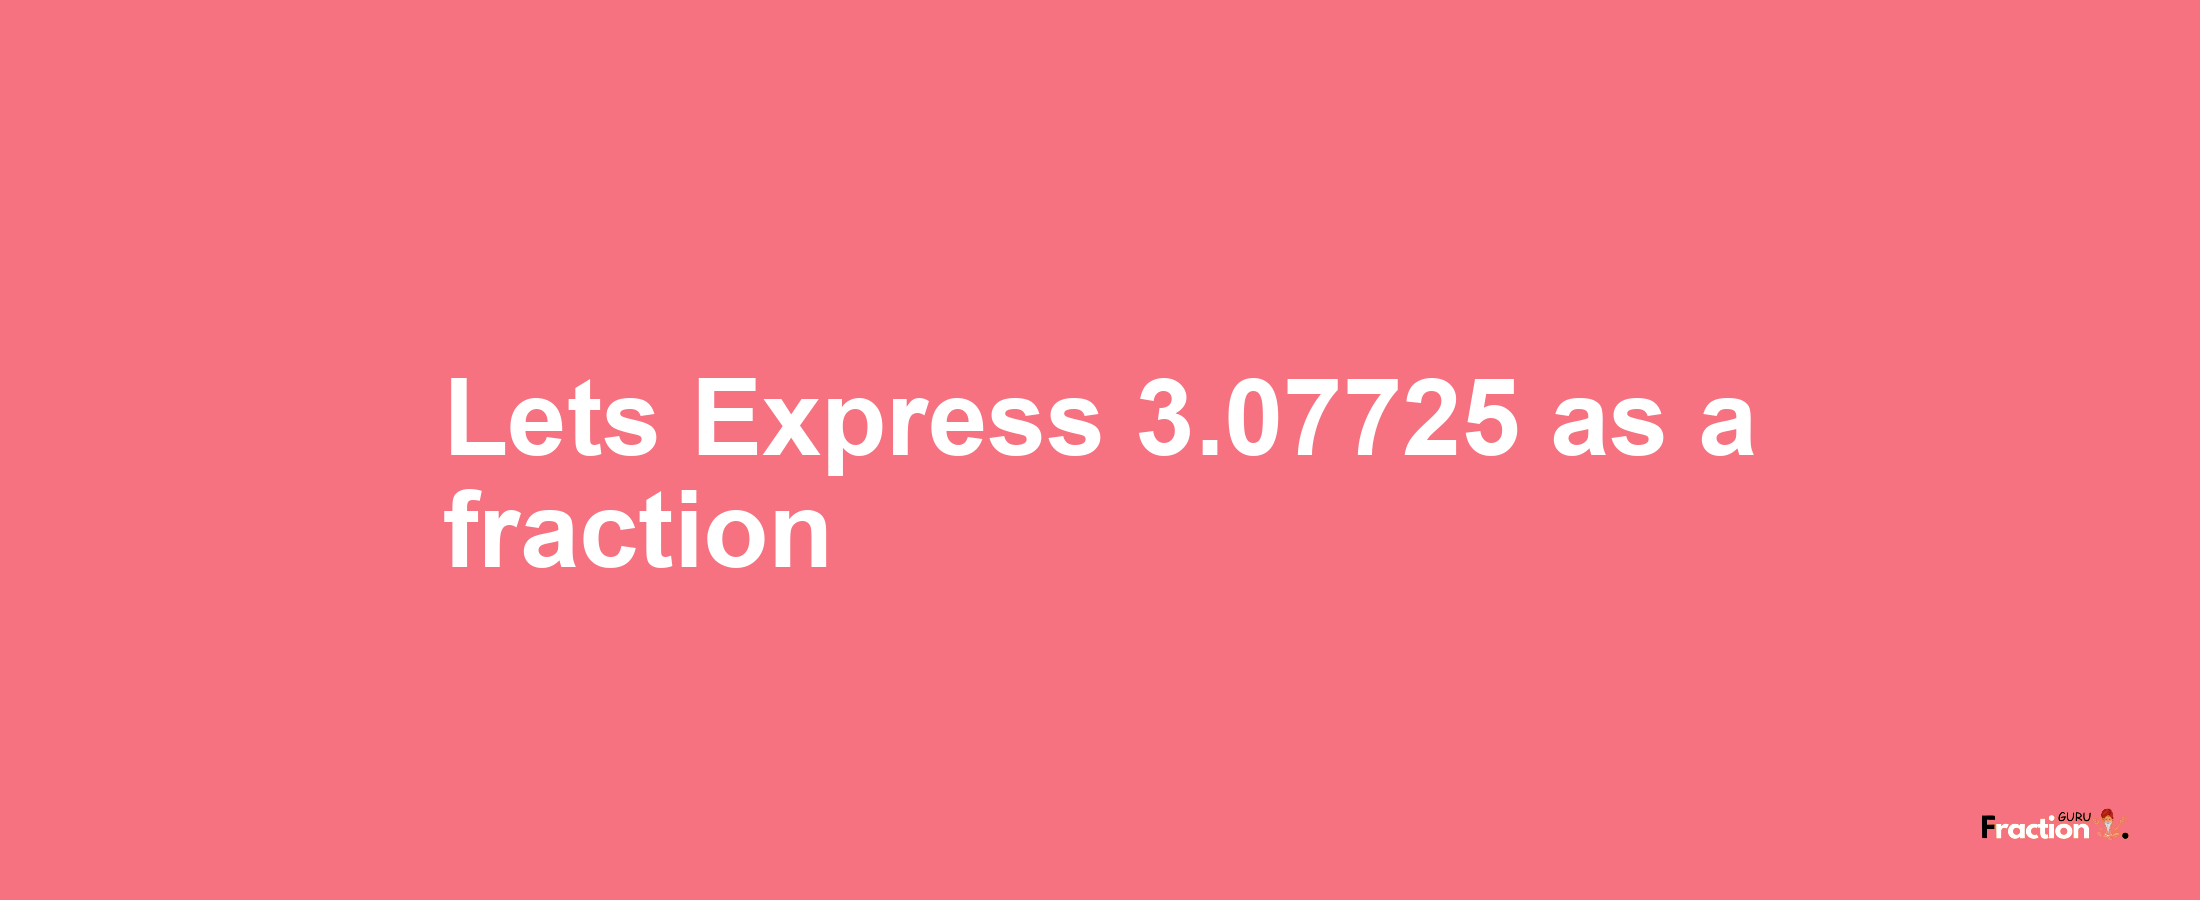 Lets Express 3.07725 as afraction